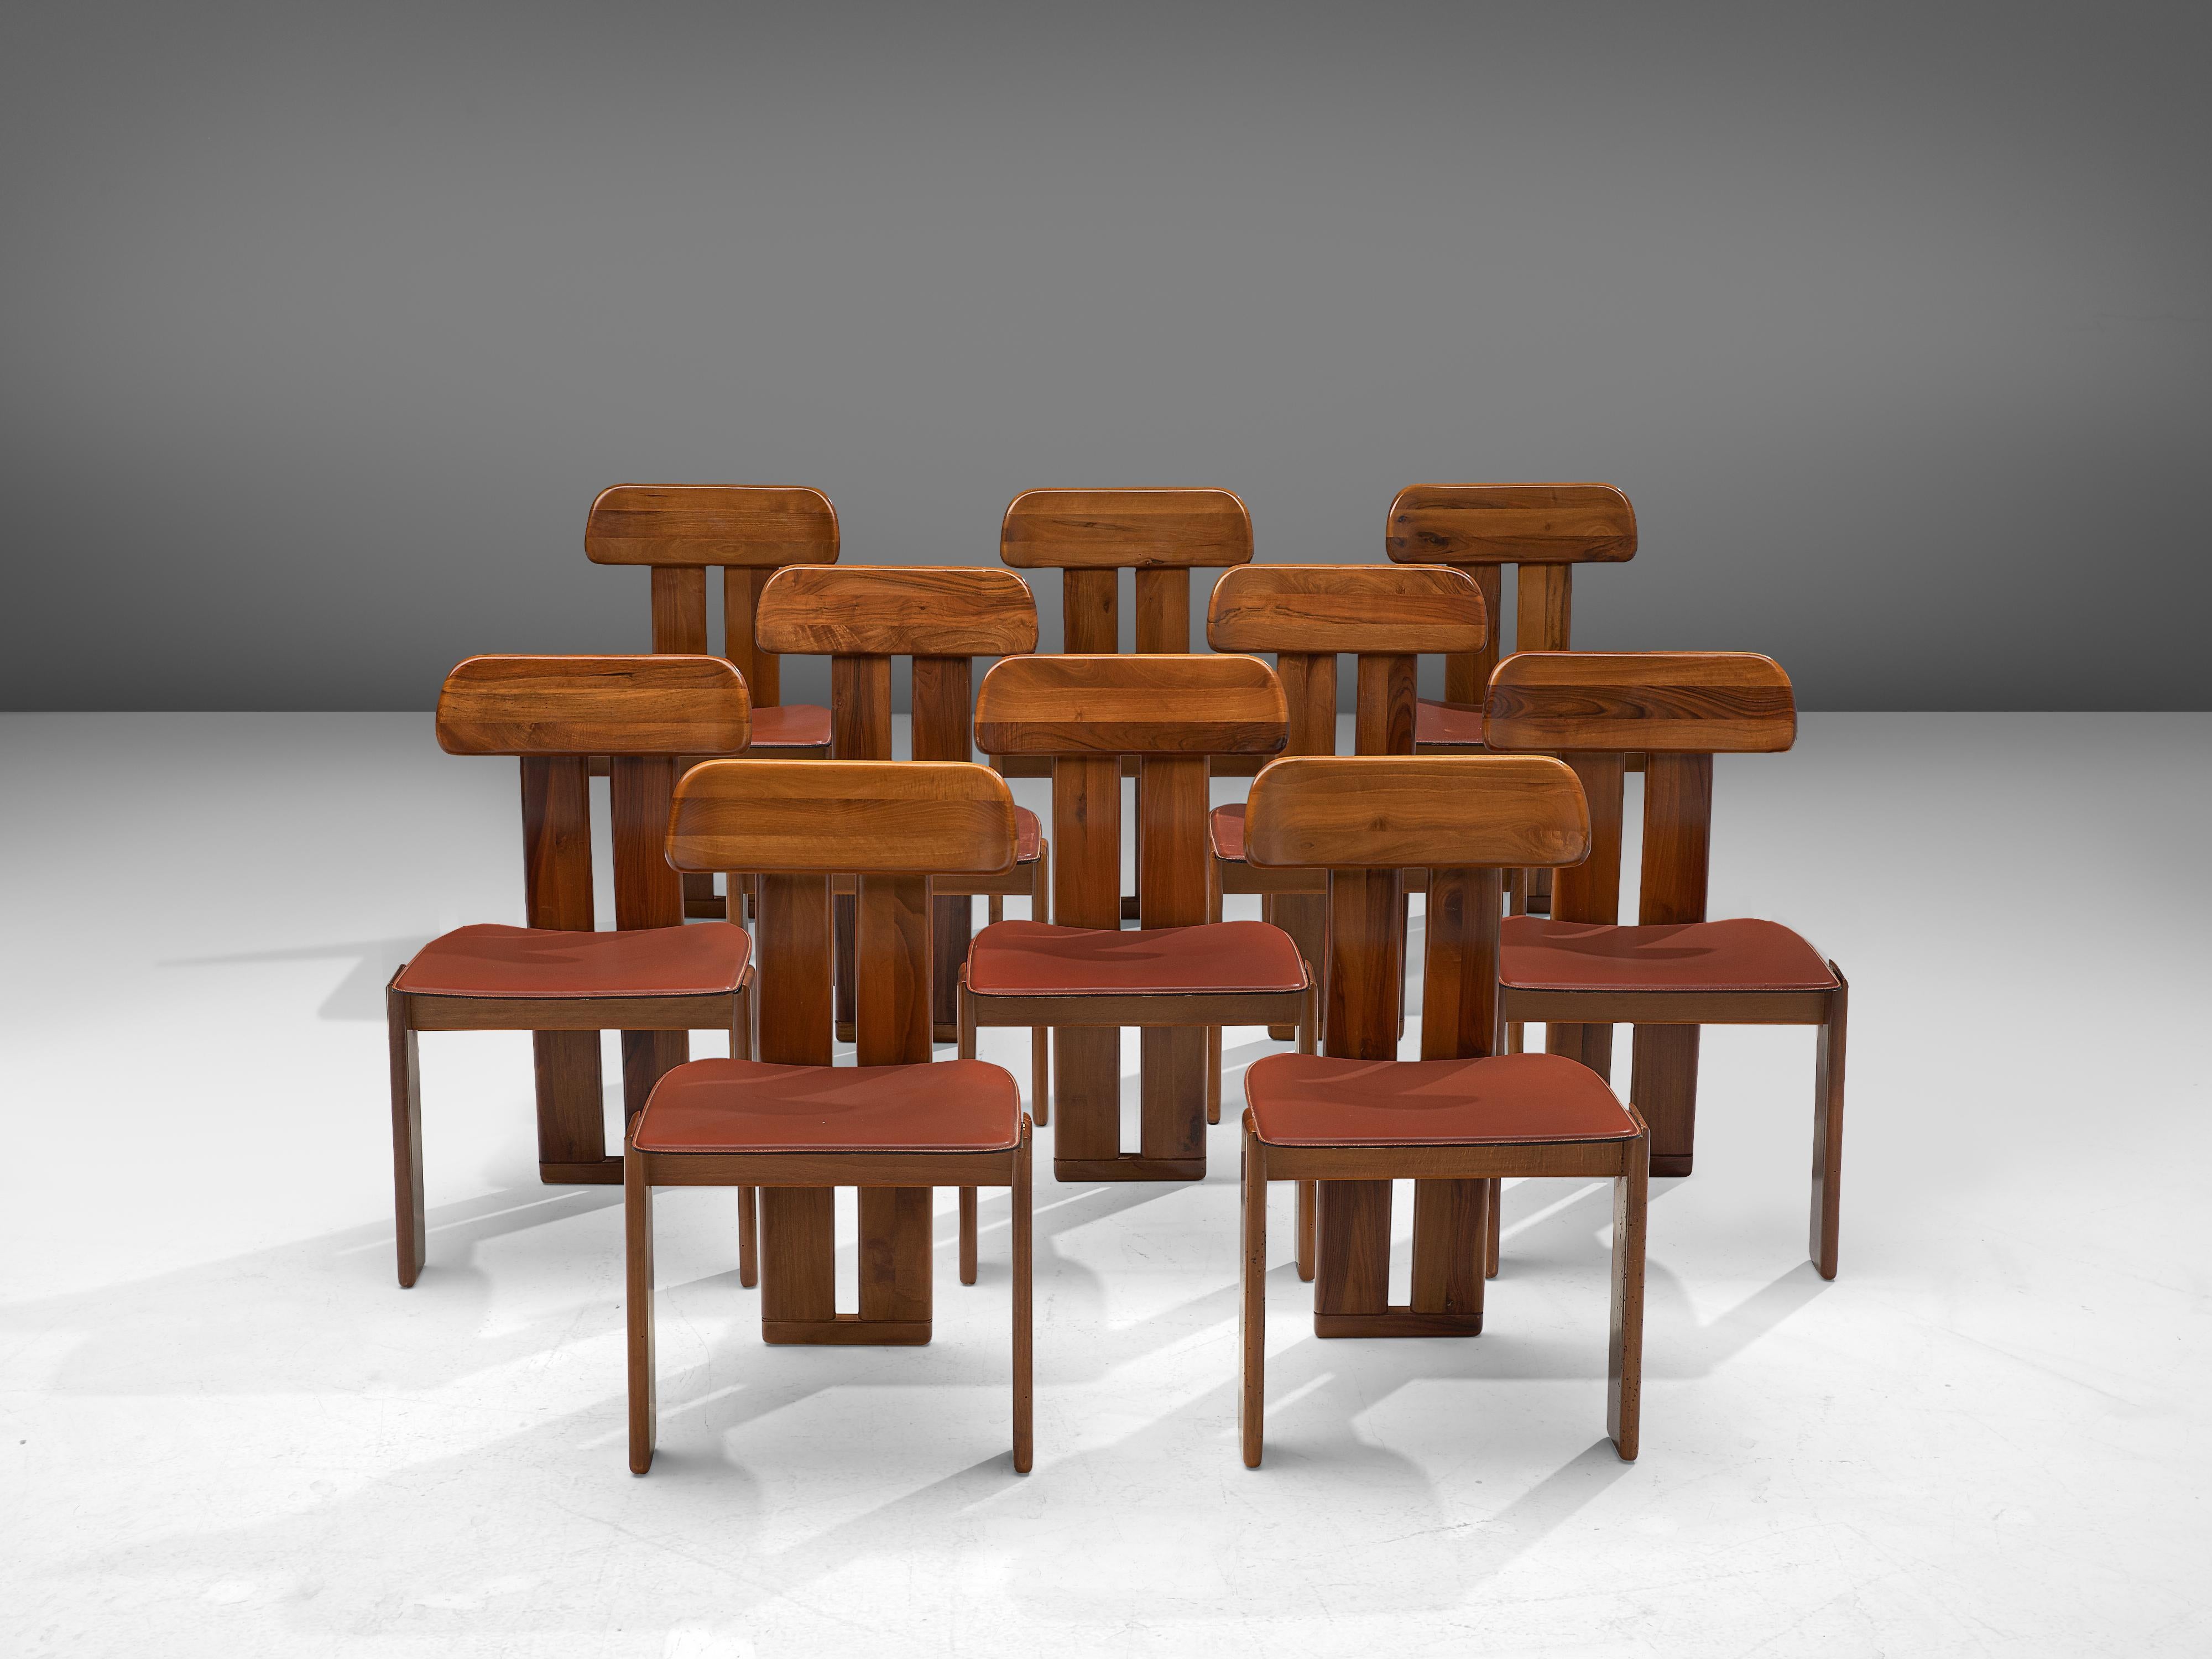 Sapporo for Mobil Girgi, set of 10 dining chairs, Italian walnut and cognac leather, Italy, 1970s.

Set of ten sculptural chairs that feature wonderful backrests, consisting of two vertical slats distanced from each other. At the bottom and top